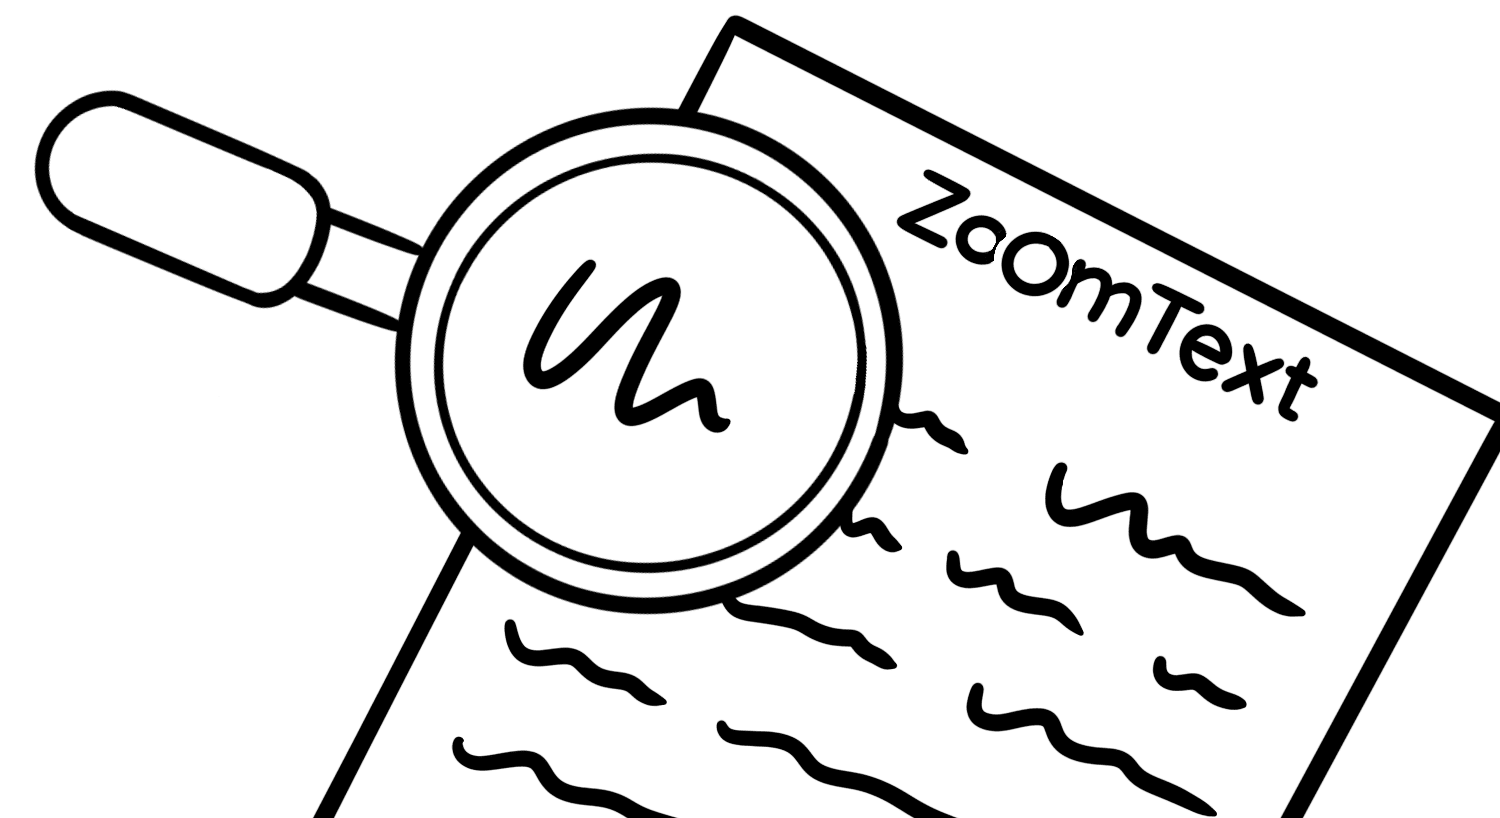 Illustration: A magnifying glass hovering over a piece of paper magnifying a portion of the text on the page. The zoom text logo is at the top of the paper.